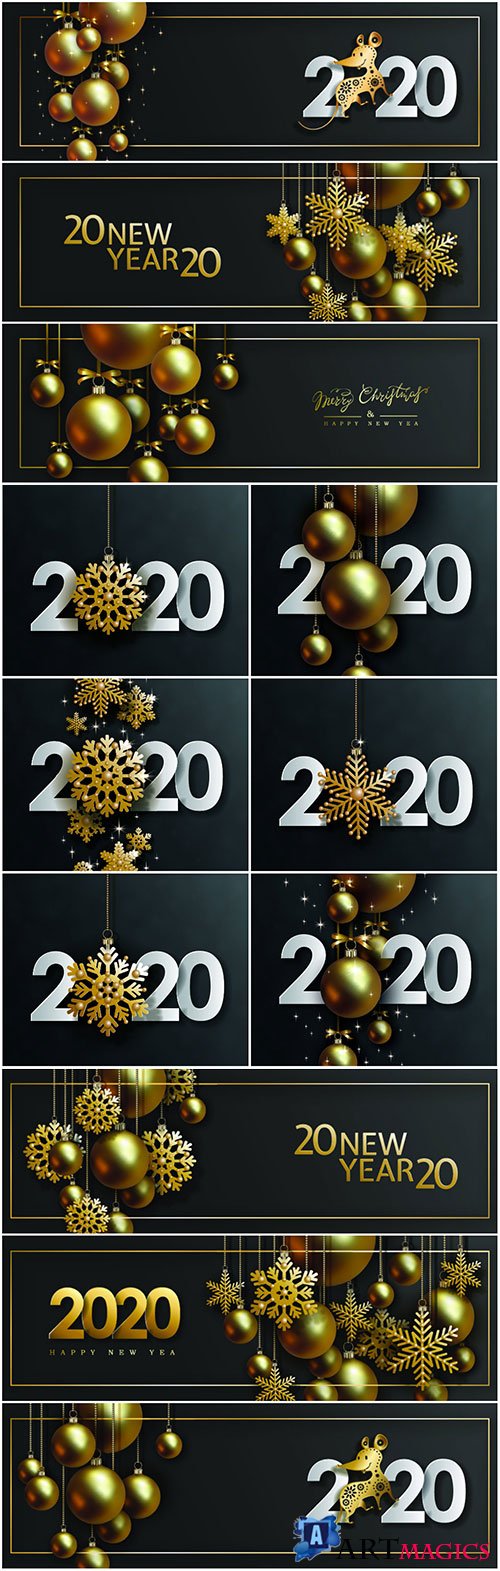 2020 Christmas and New Year design with hanging realistic golden balls and decorative snowflakes